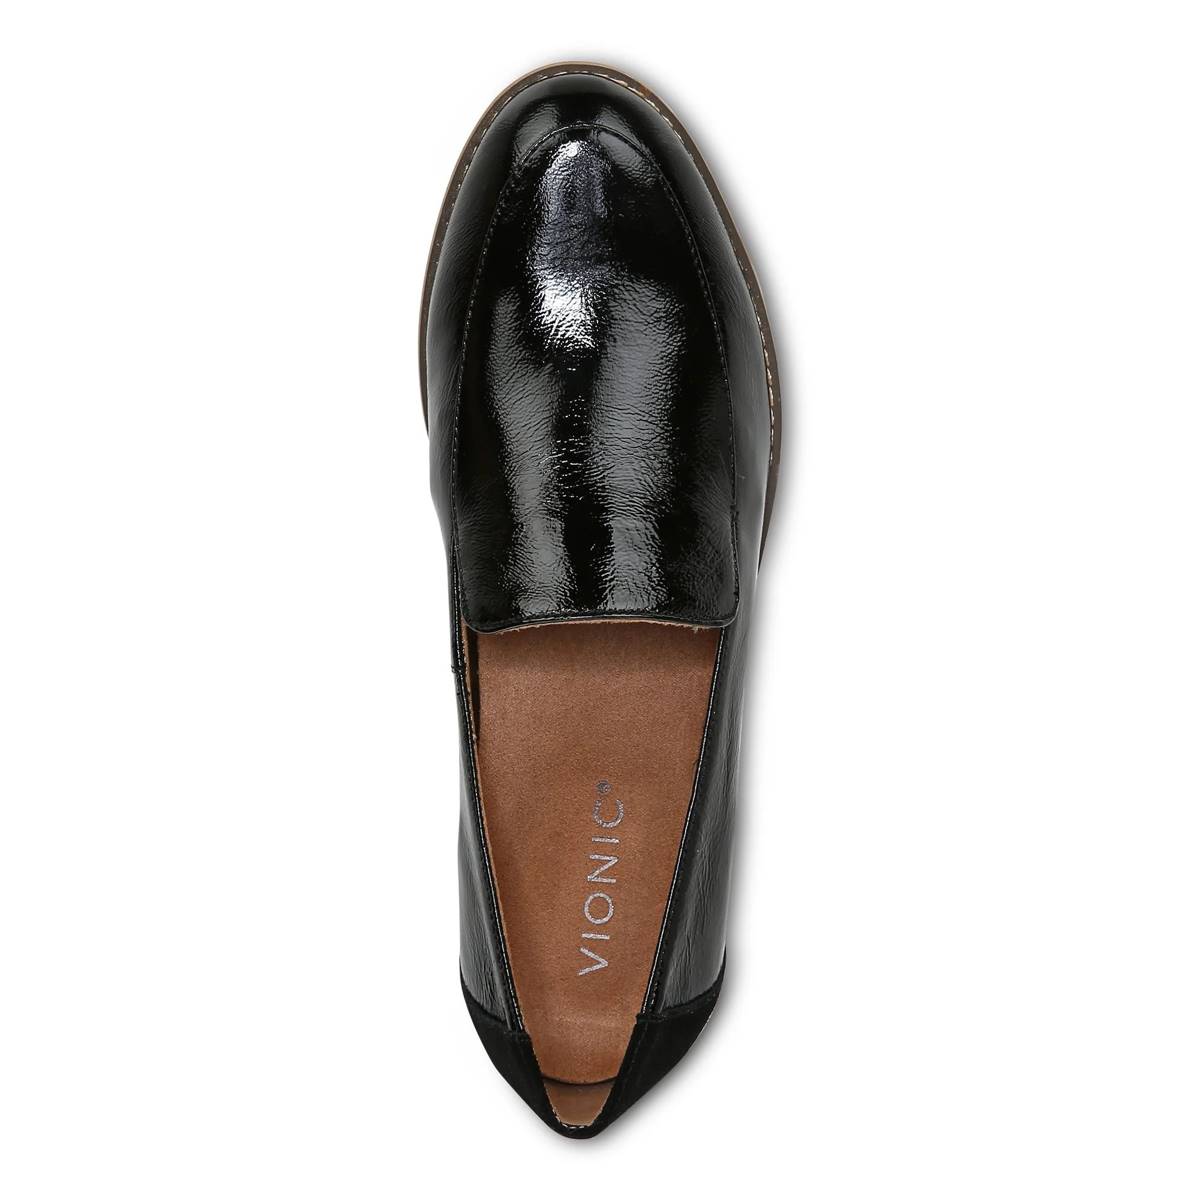 Womens Vionic Kensley Loafers